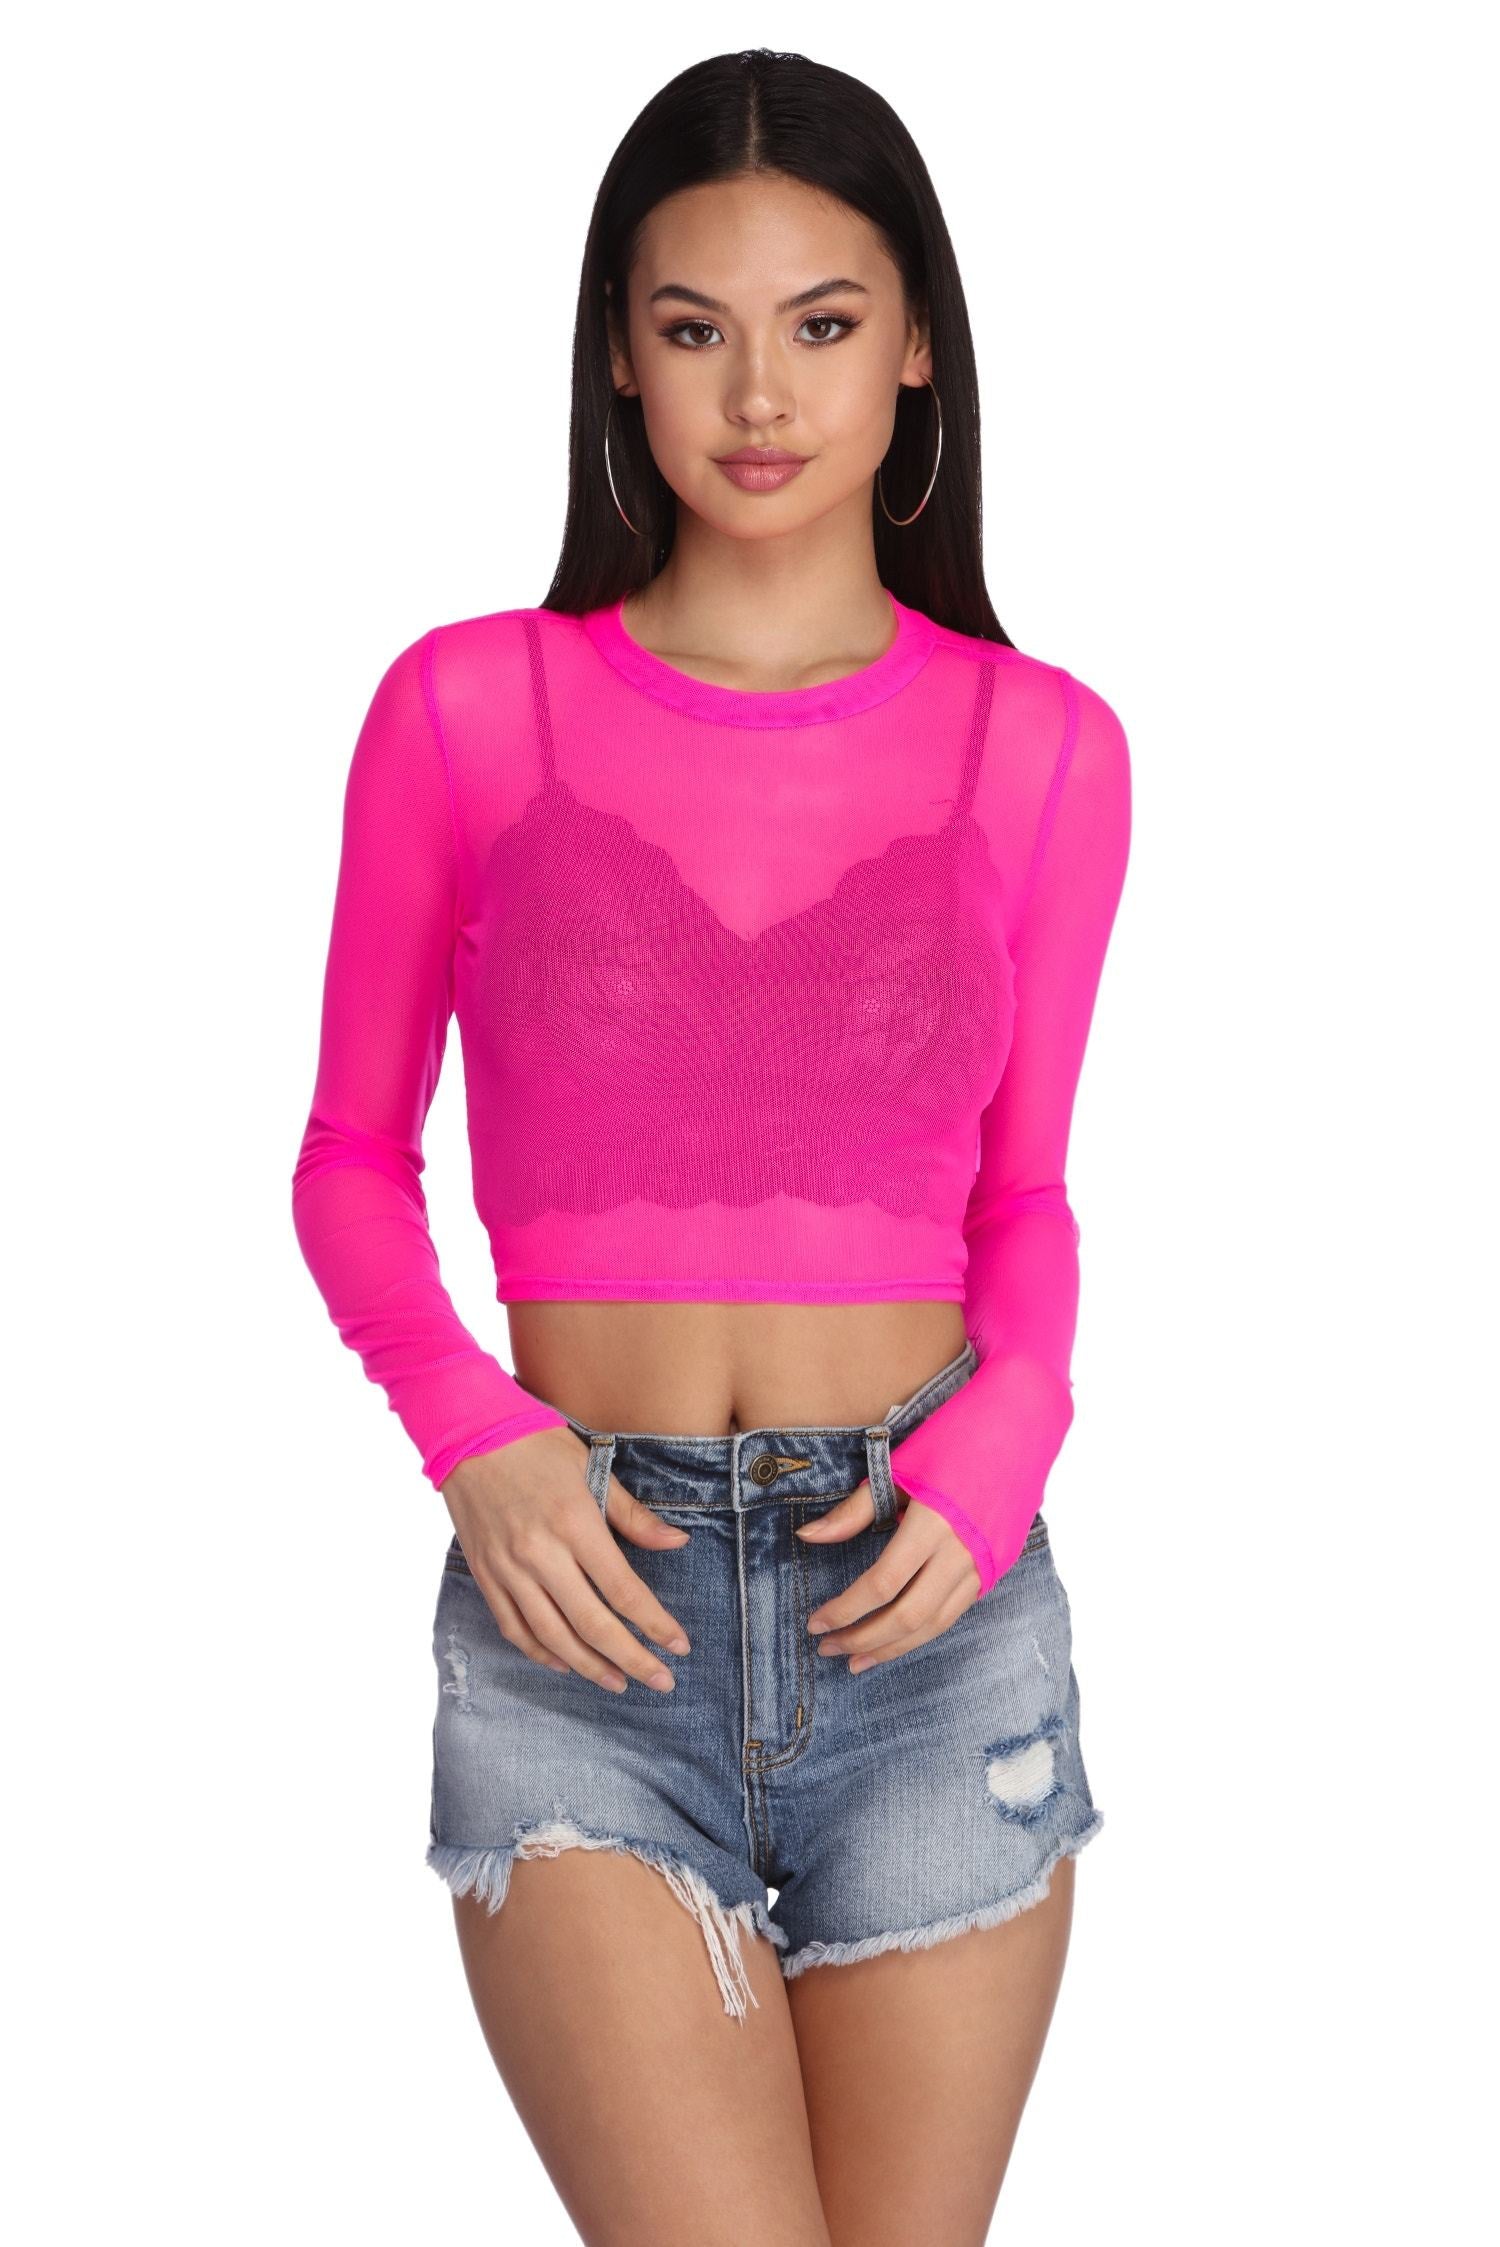 Mesh With The Best Crop Top